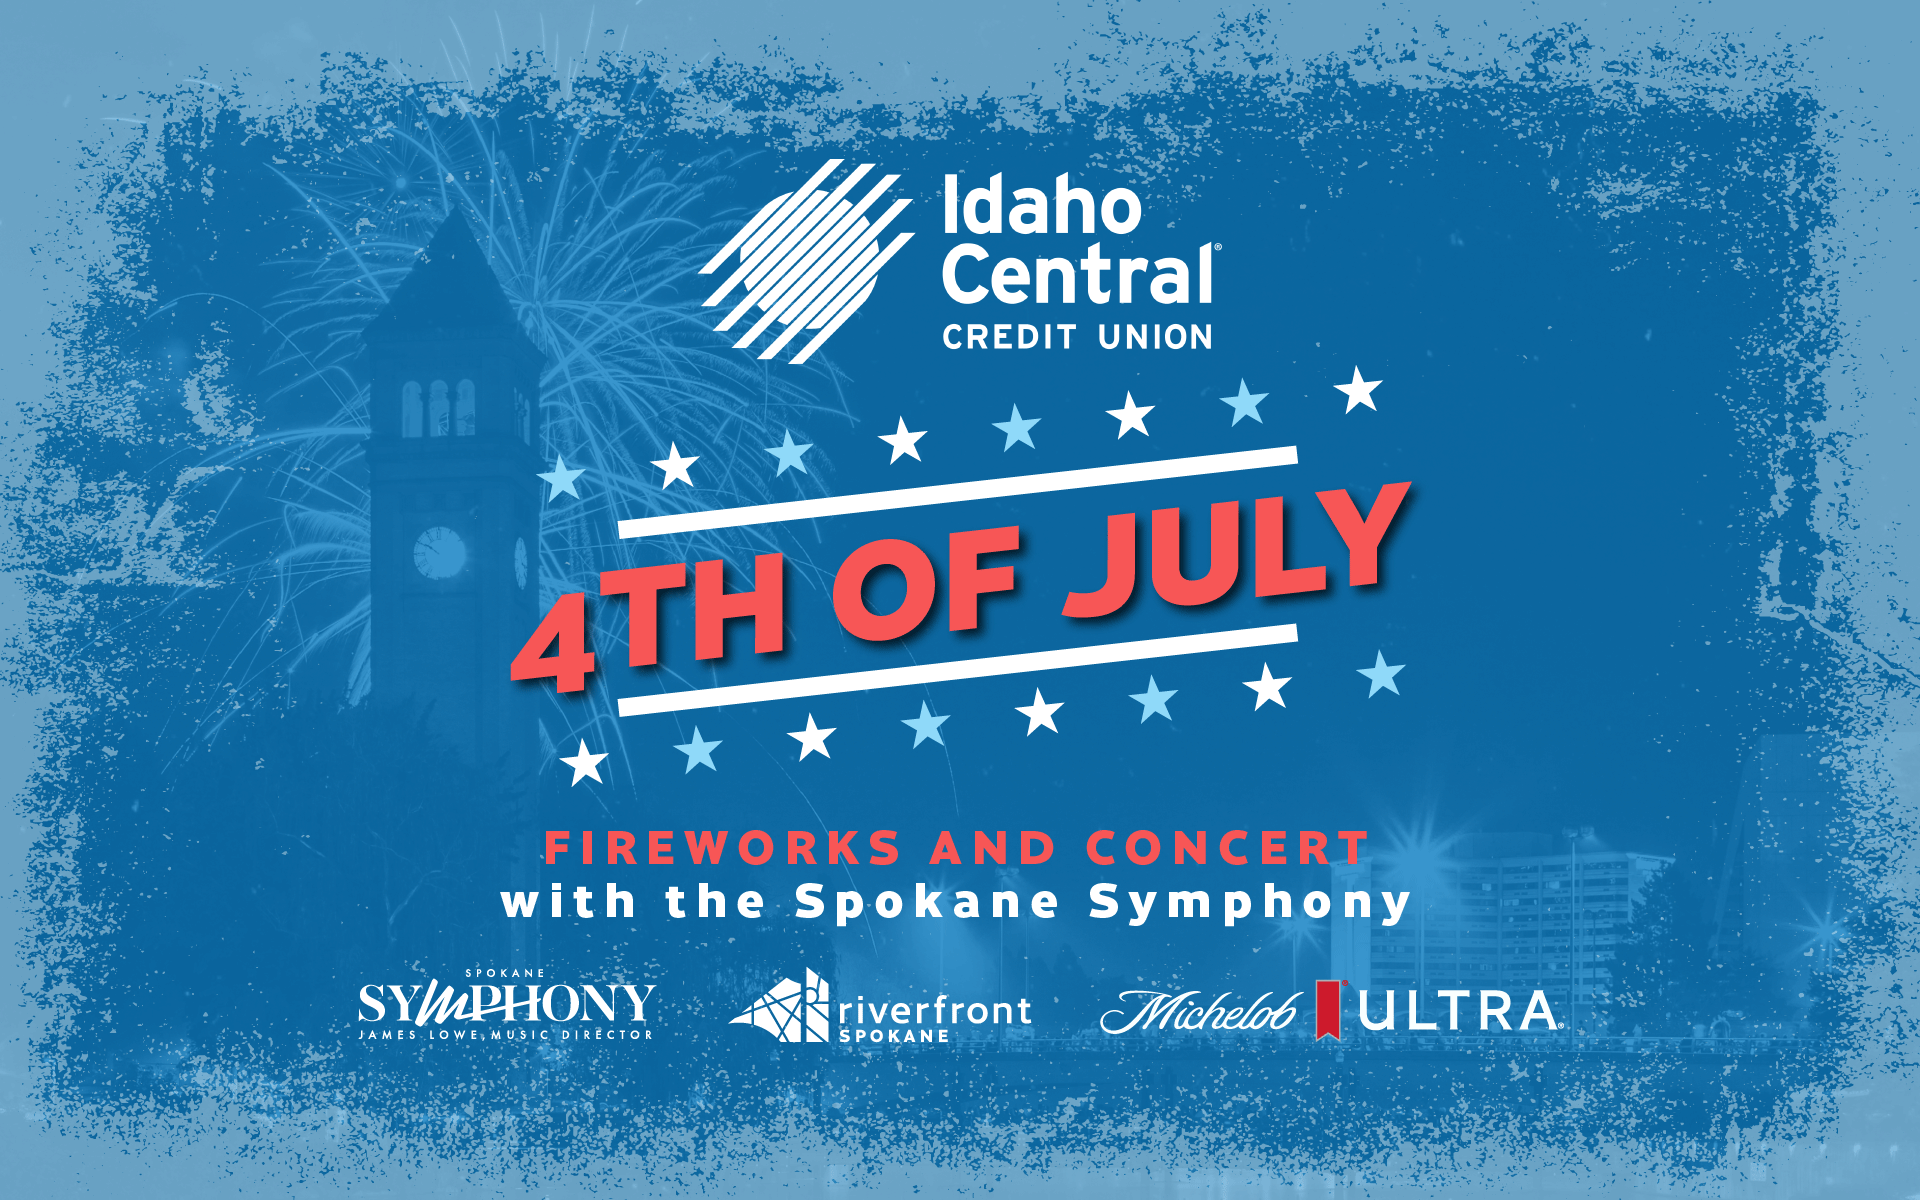 ICCU 4th of July Fireworks and Concert with the Spokane Symphony City